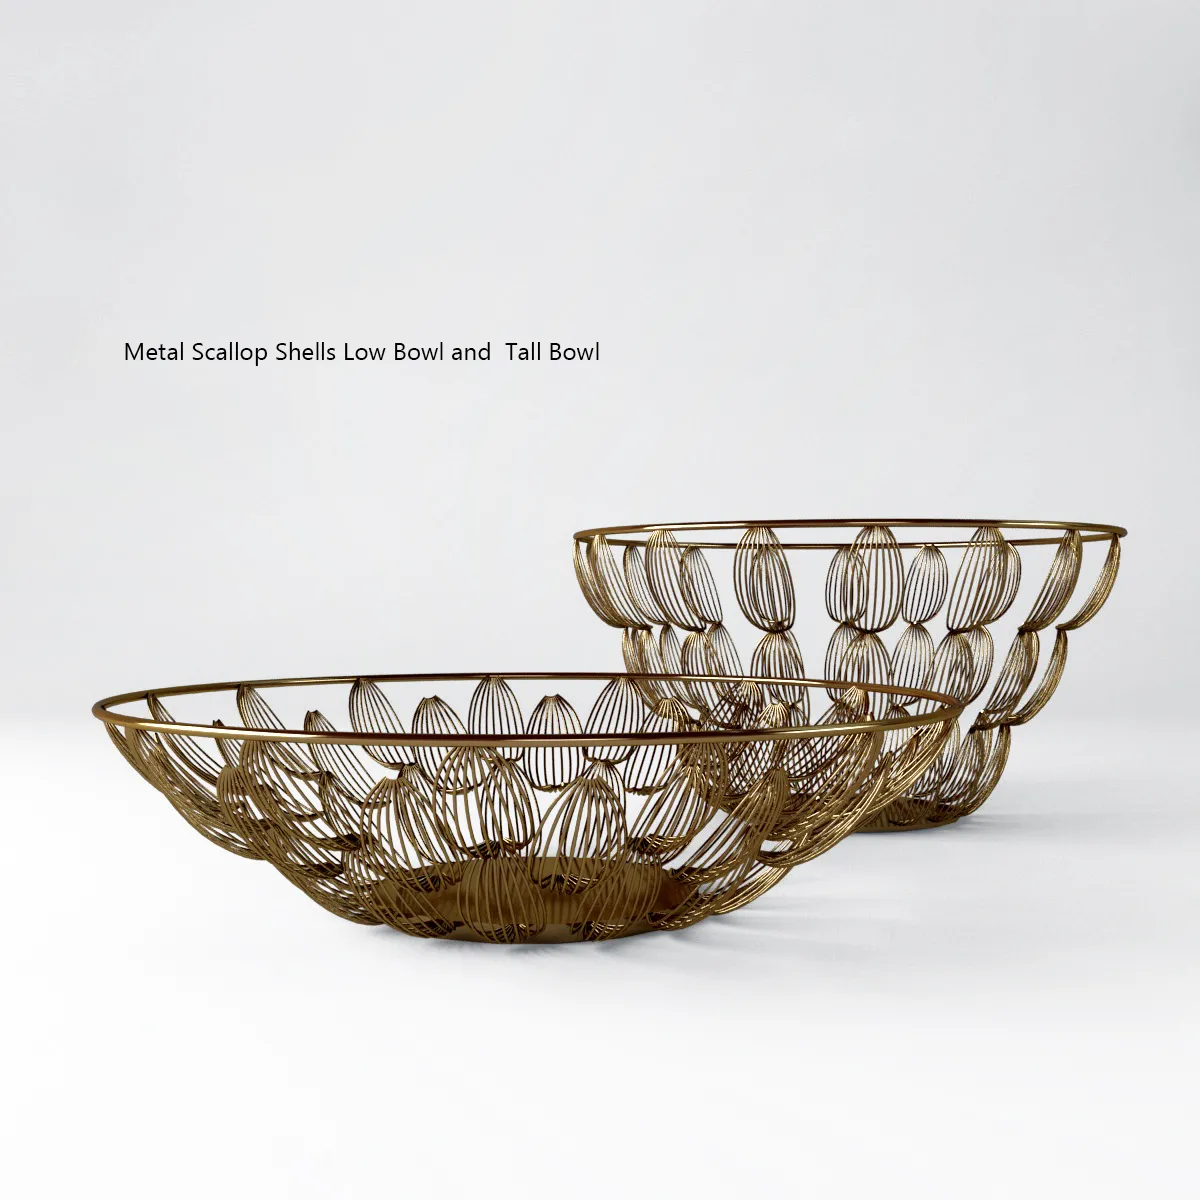 Metal Scallop Shells Low Bowl and Tall Bowl – 2282